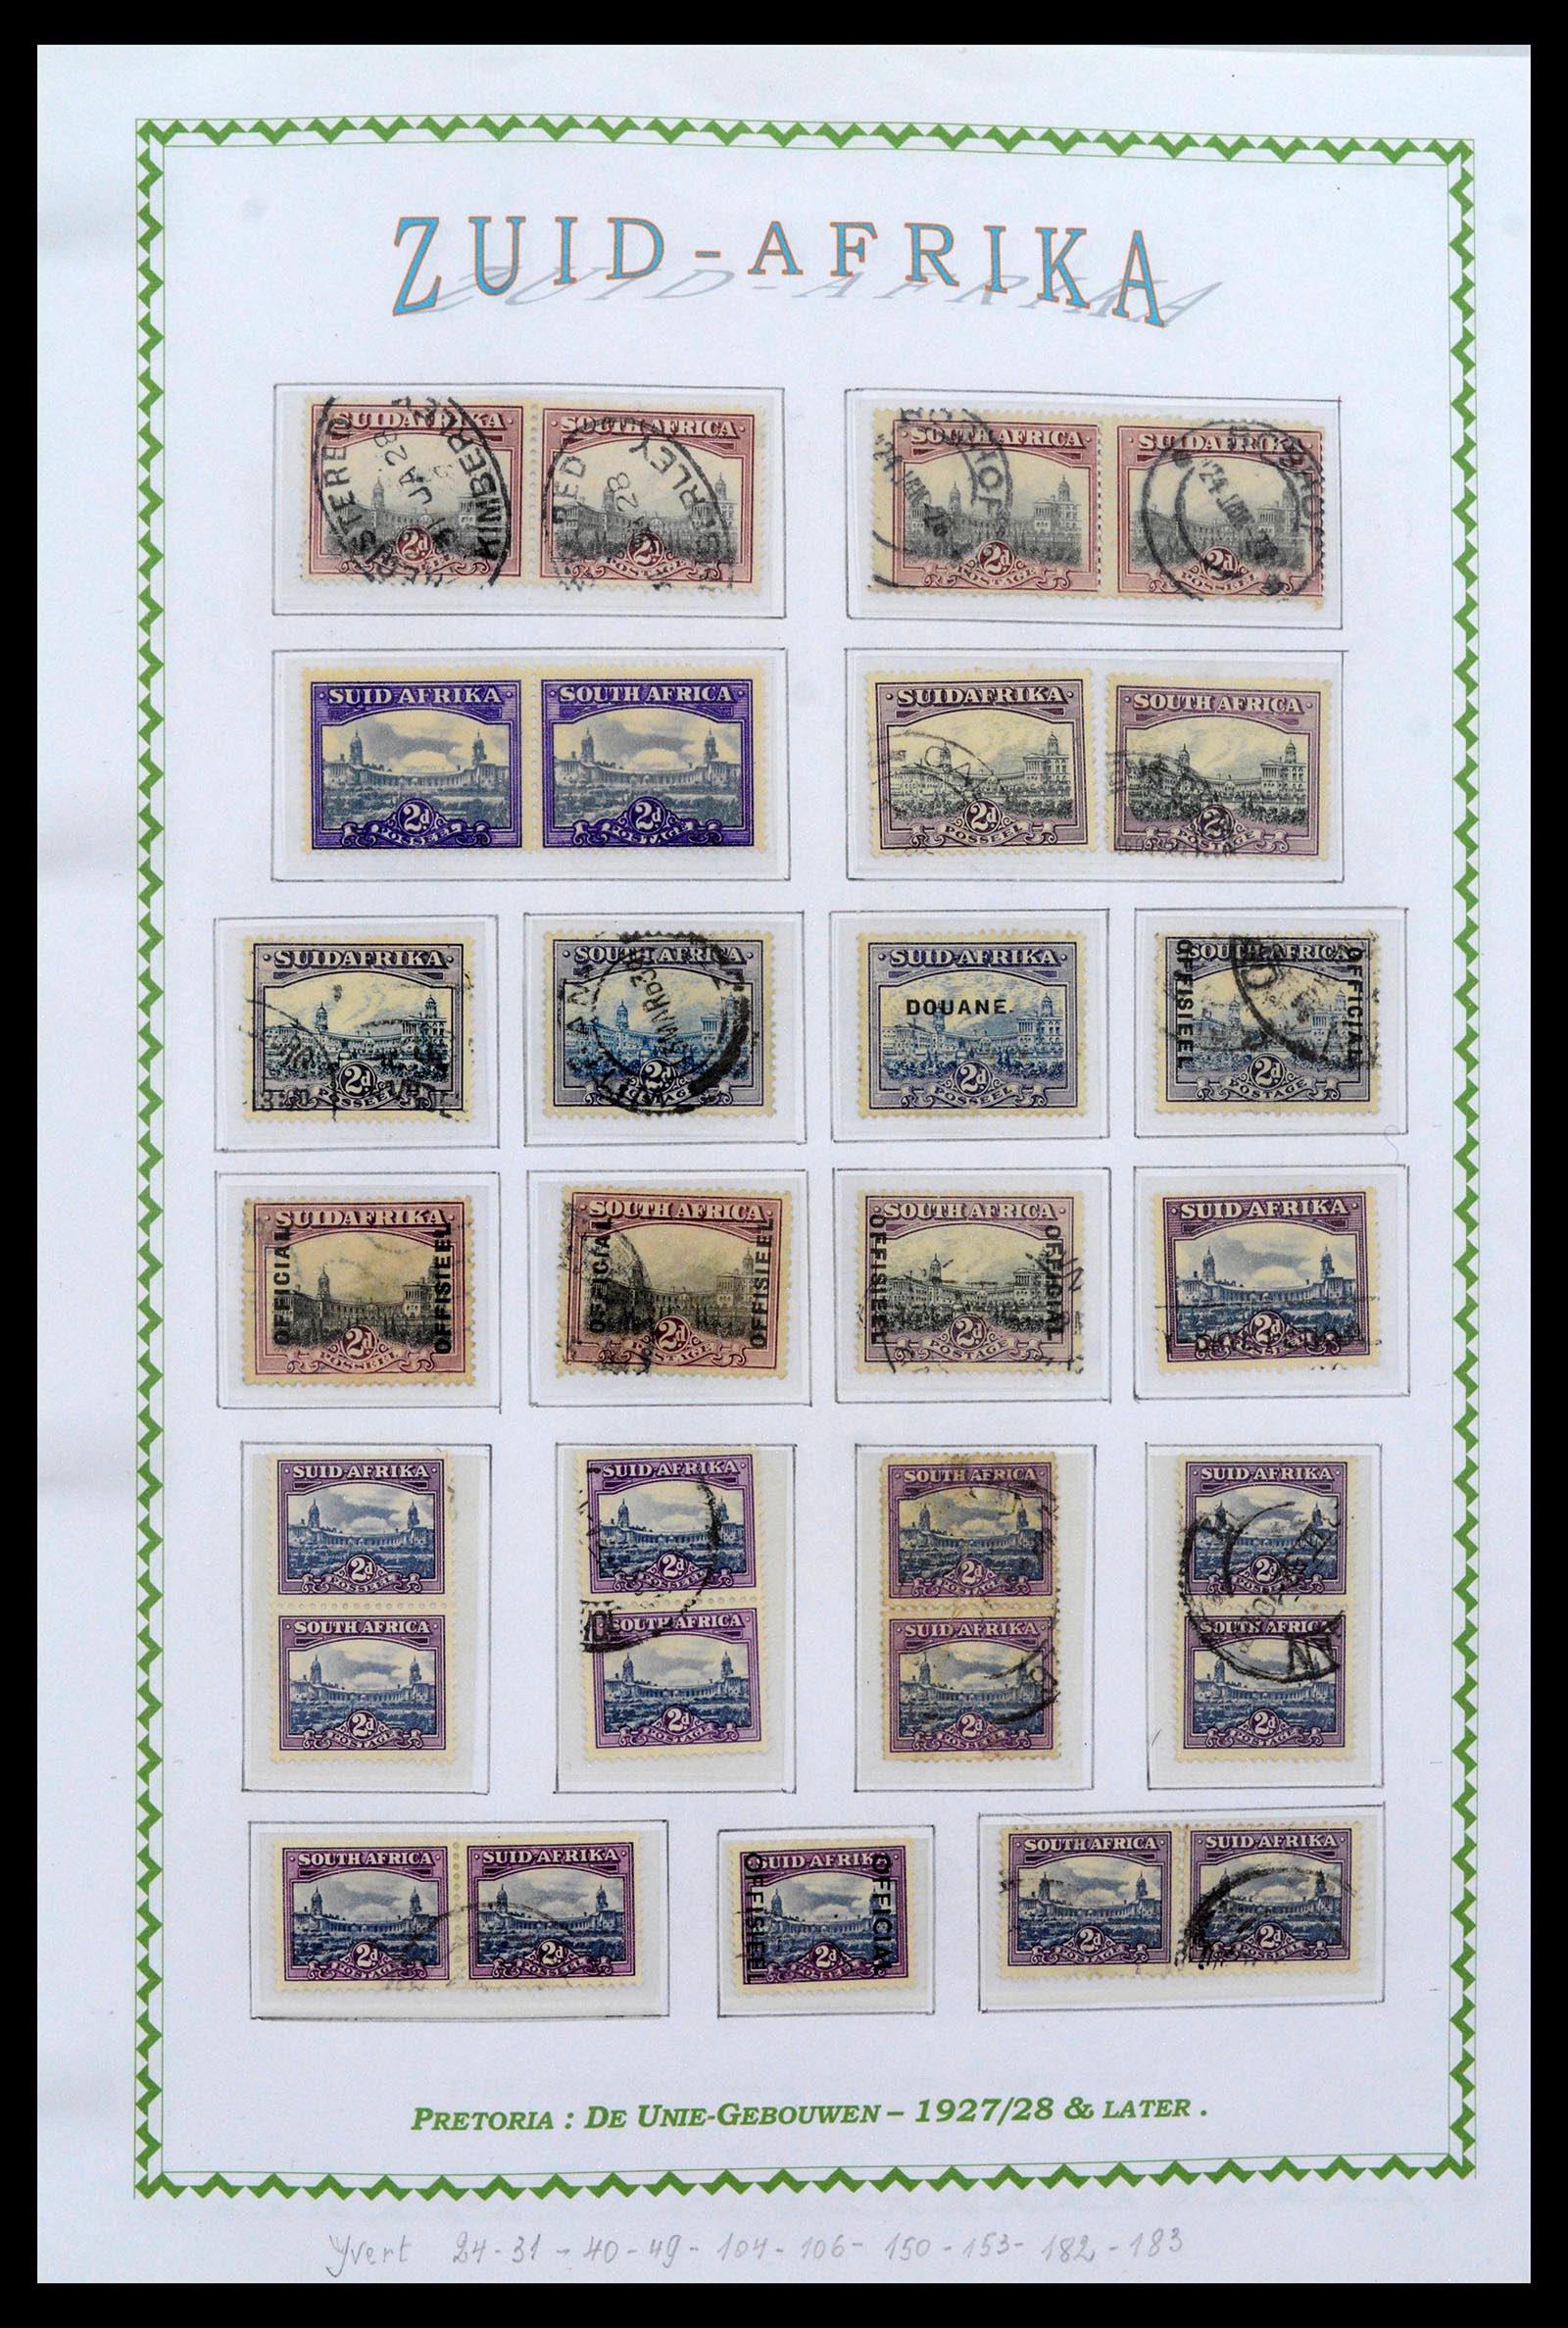 39226 0025 - Stamp collection 39226 South Africa and States 1853-2000.